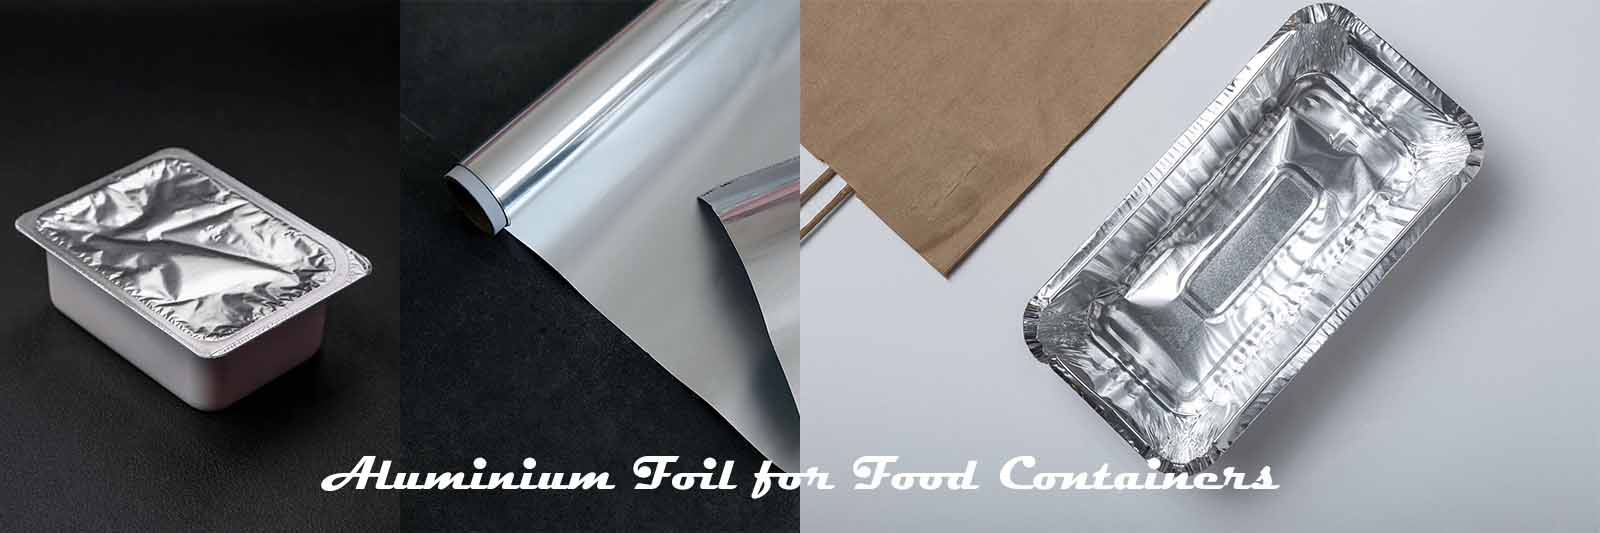 aluminum foil roll for food containers